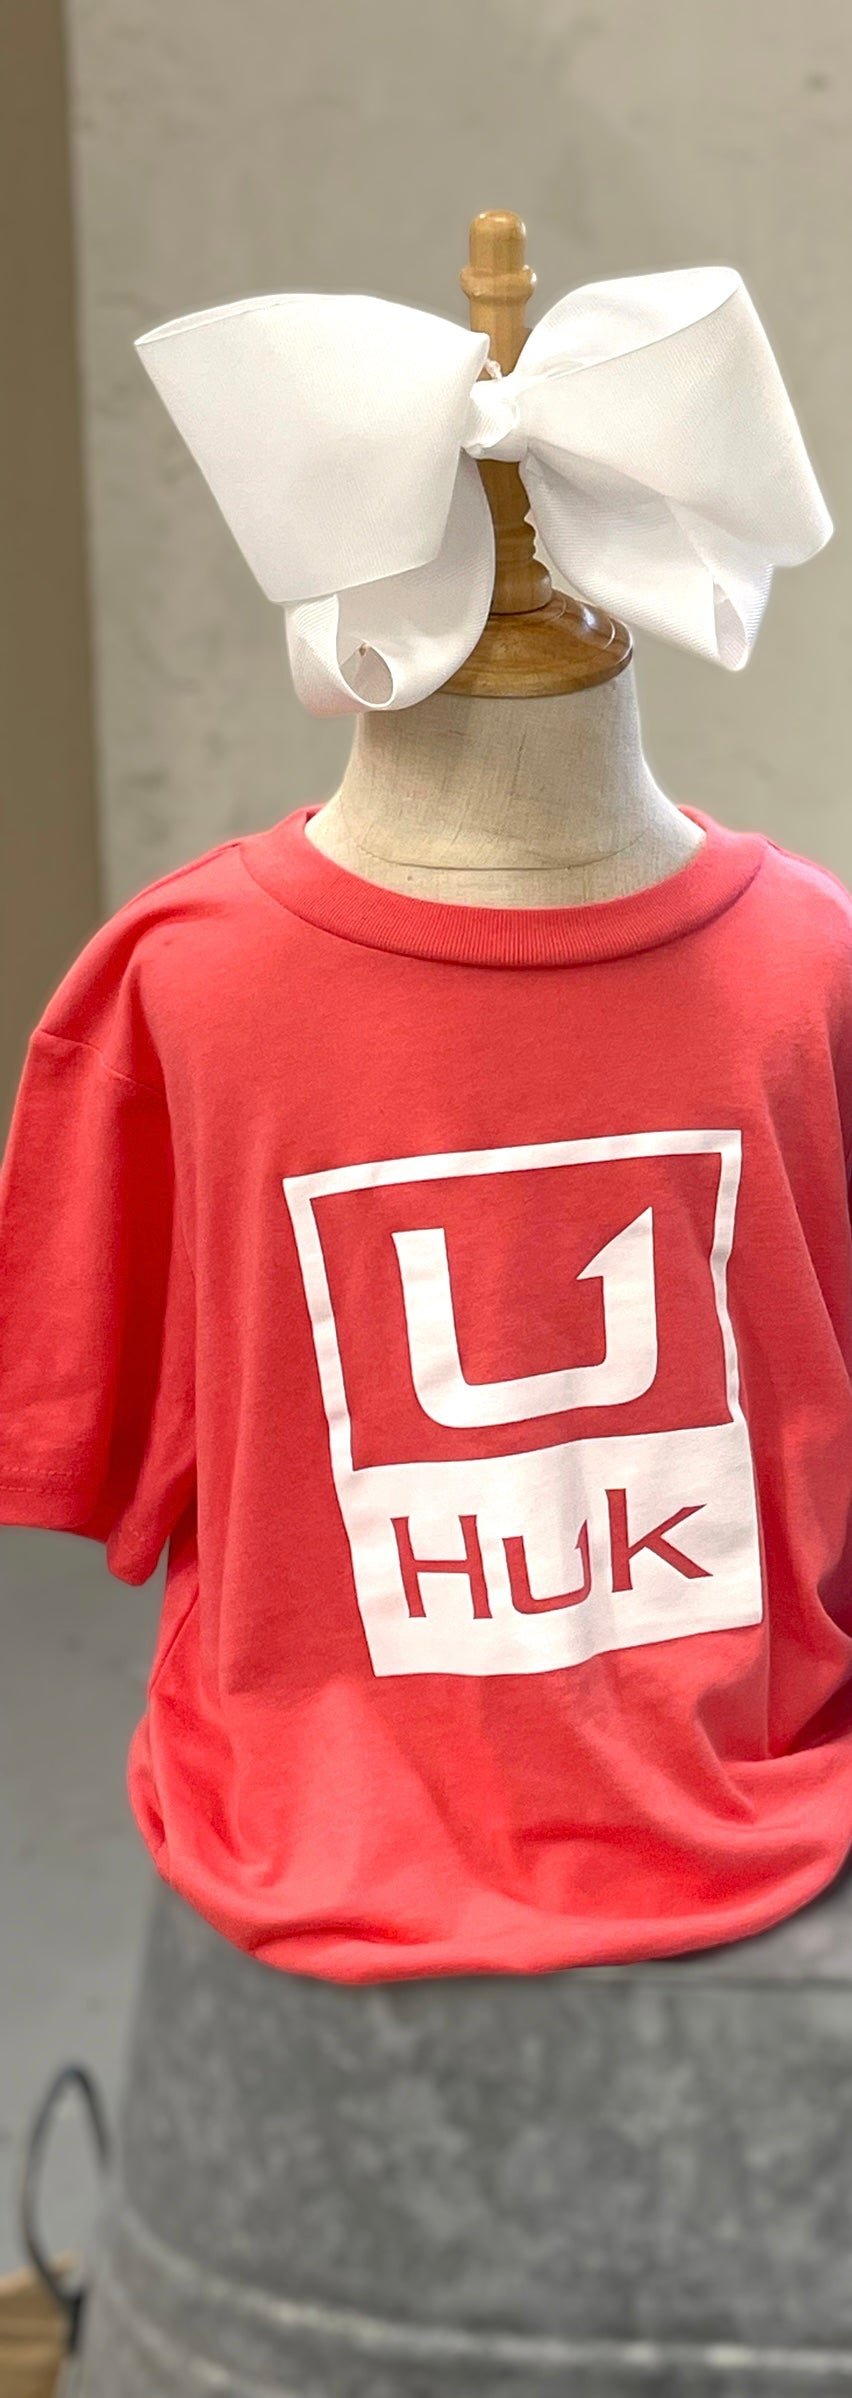 Huk Logo Tee Sun Washed Red – Railroad Junction Children's Boutique